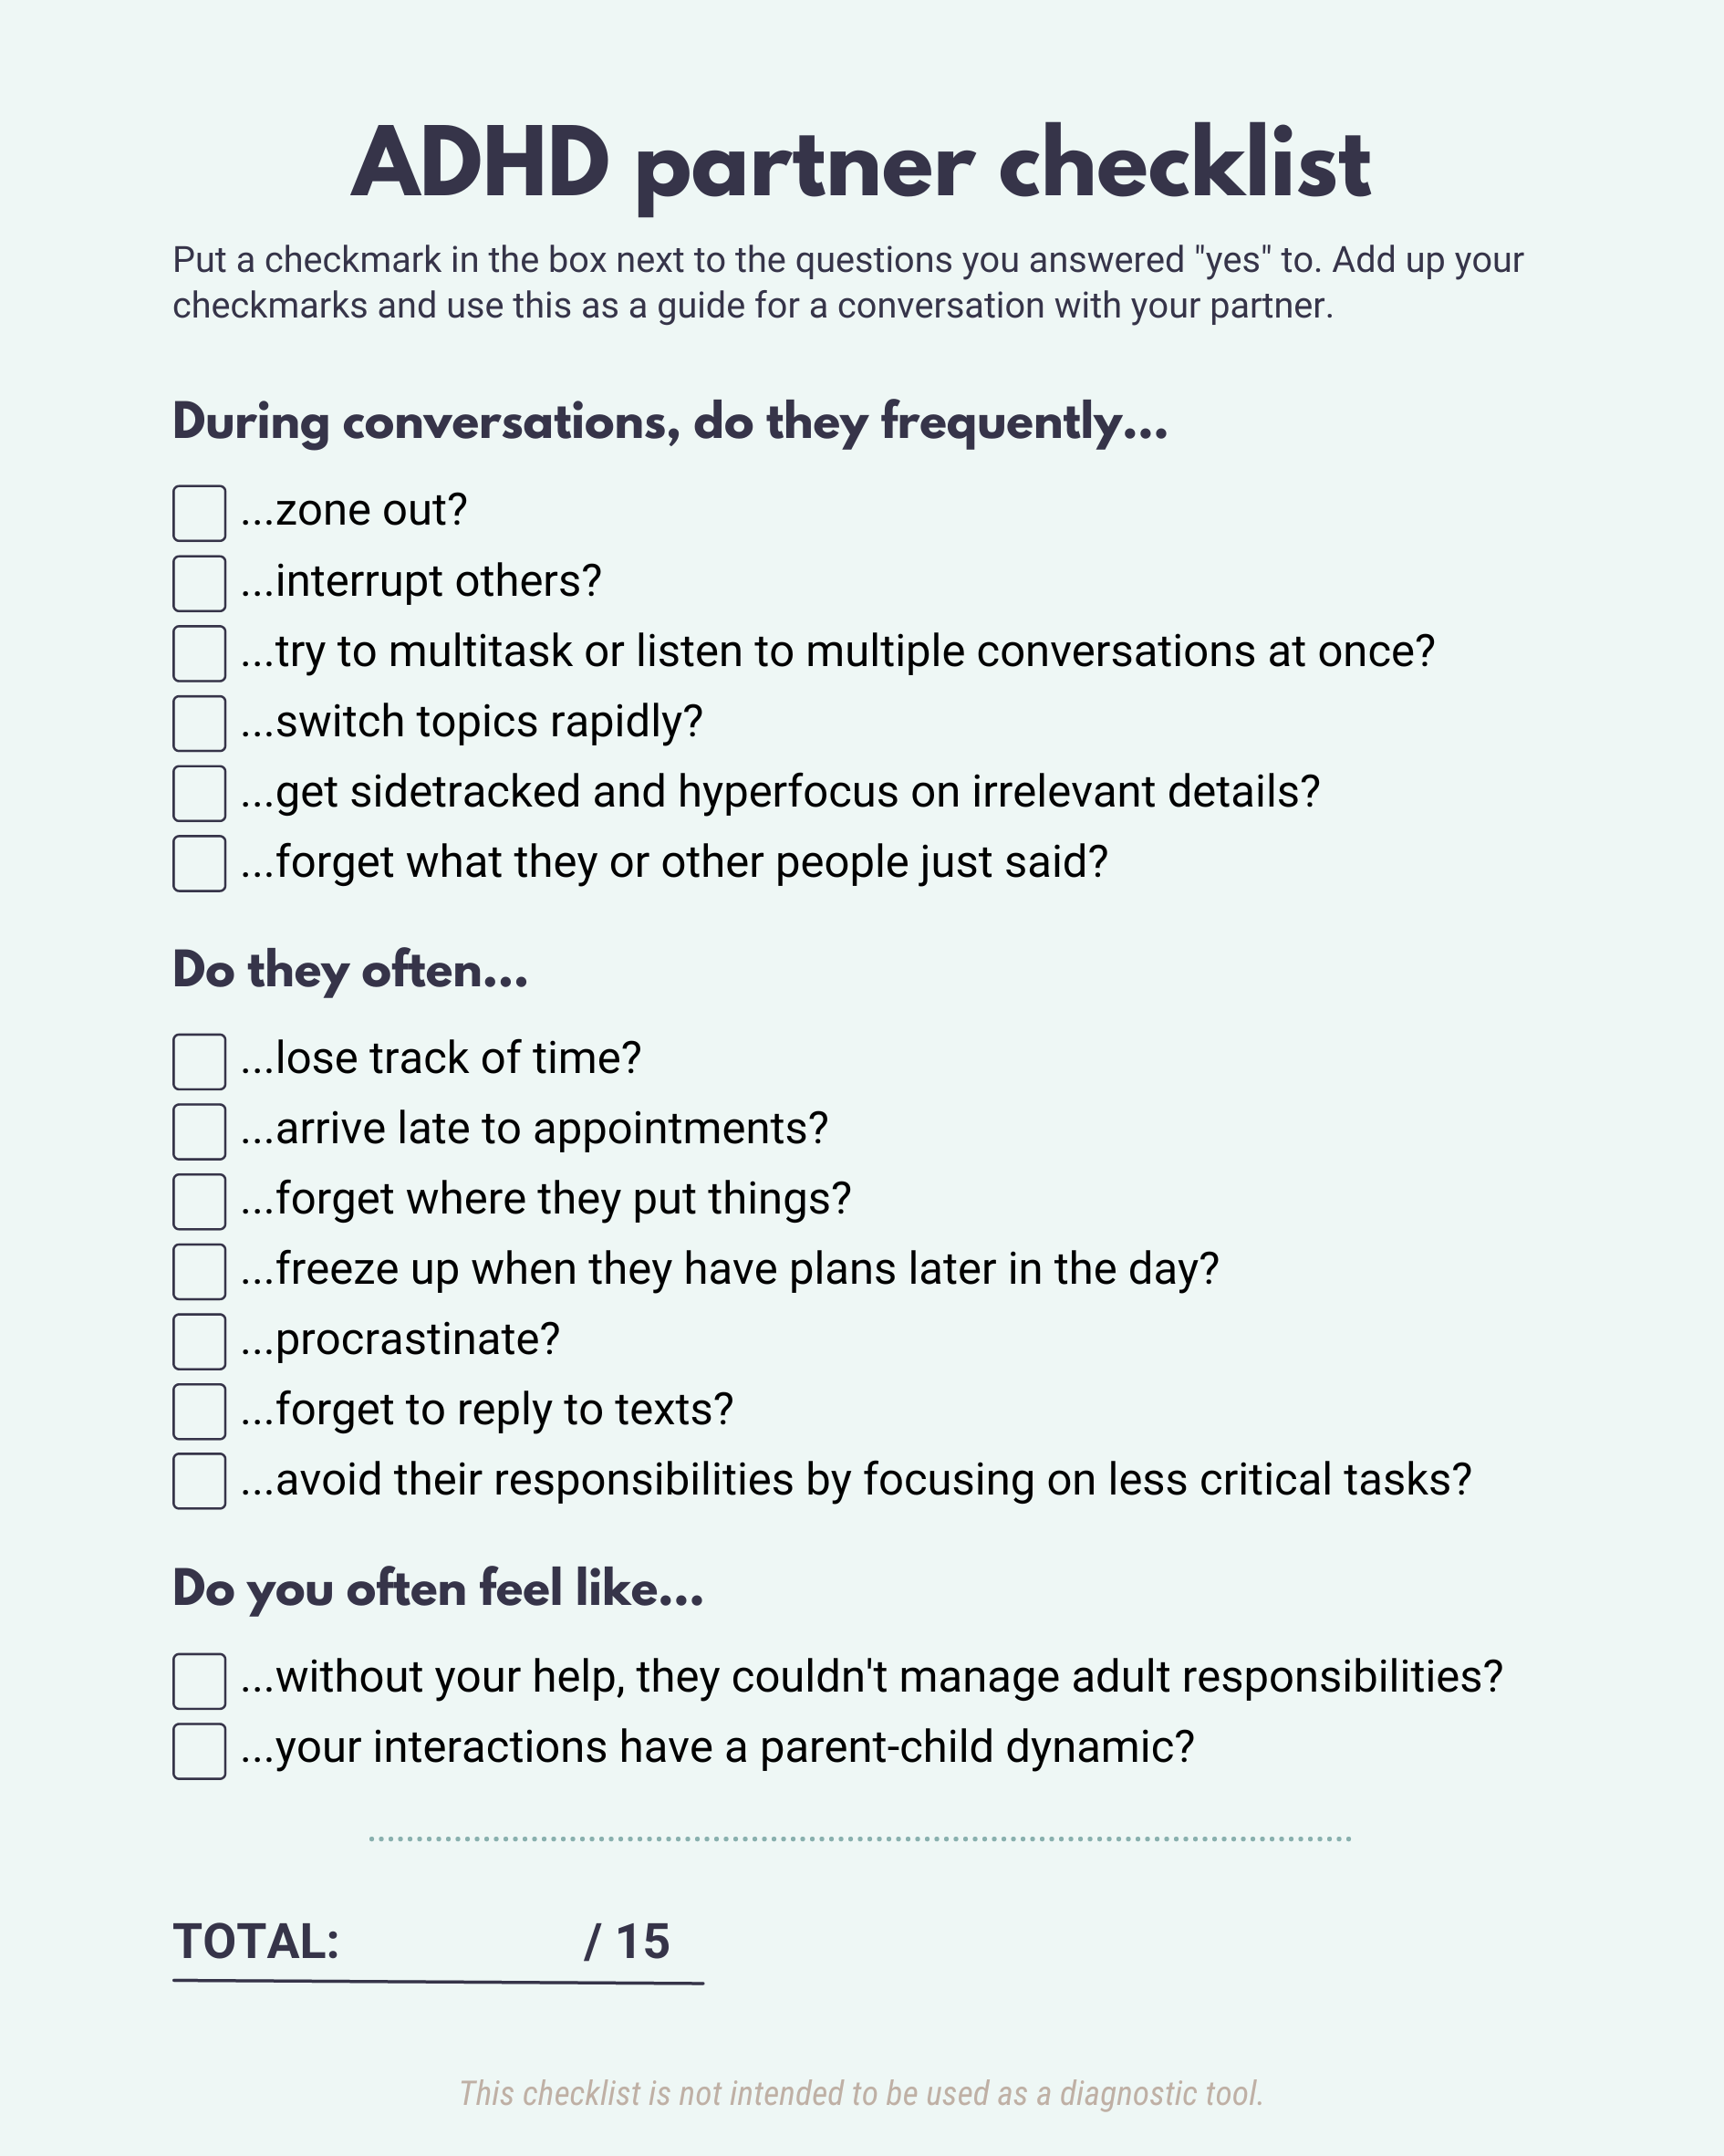 ADHD partner checklist, out of 15 points. Questions are the same as the ones above in checklist format. This sheet is not to be used as a diagnostic tool.